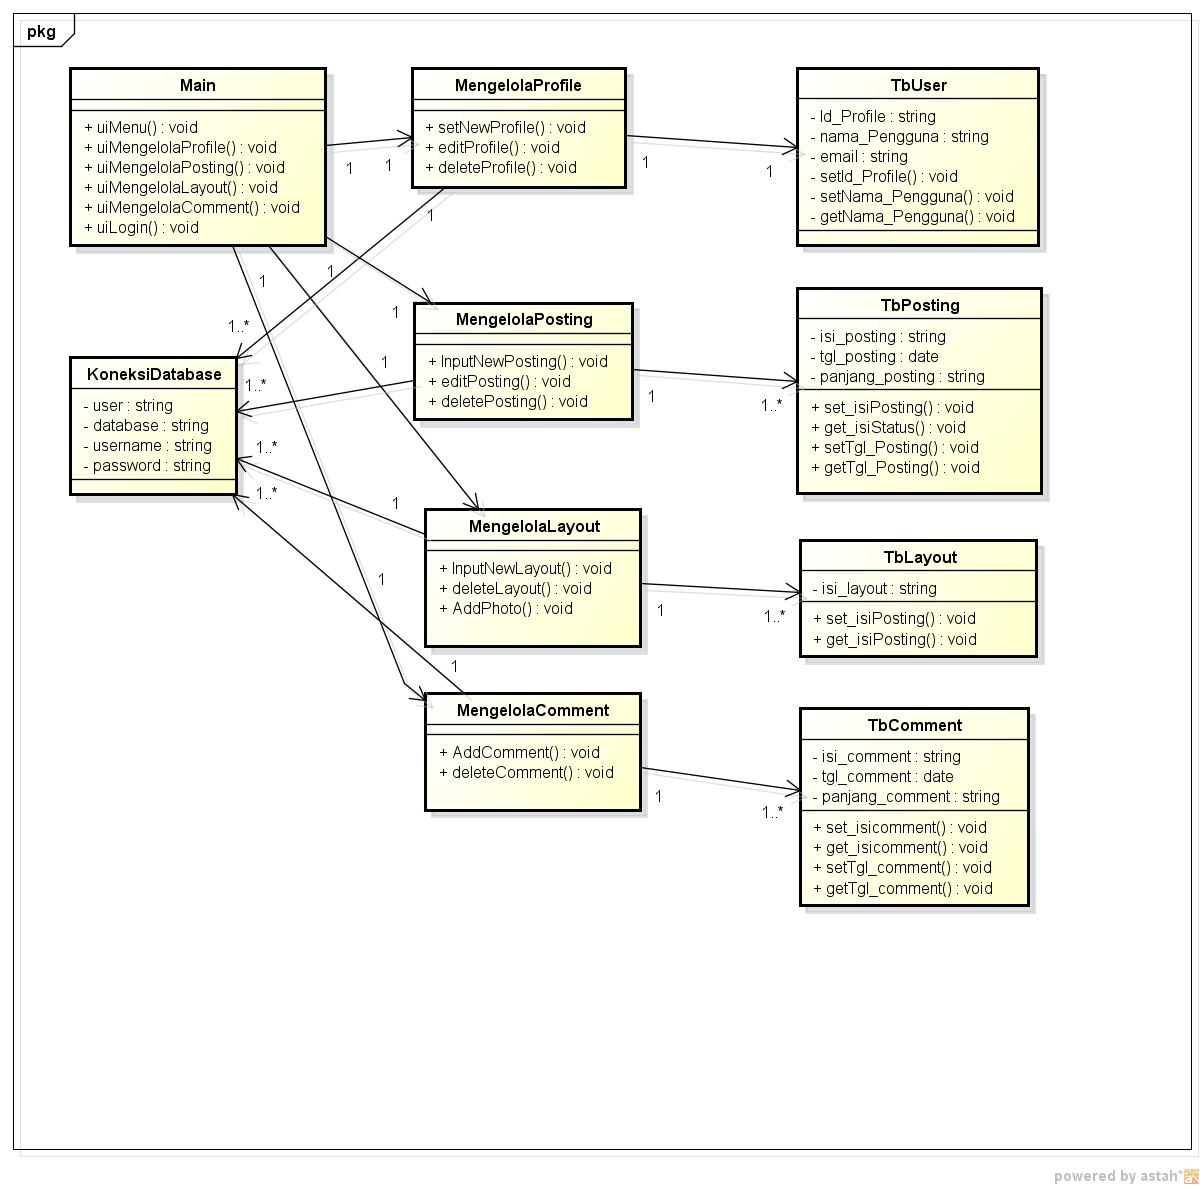 Awesome Vacation: Class Diagram Blog